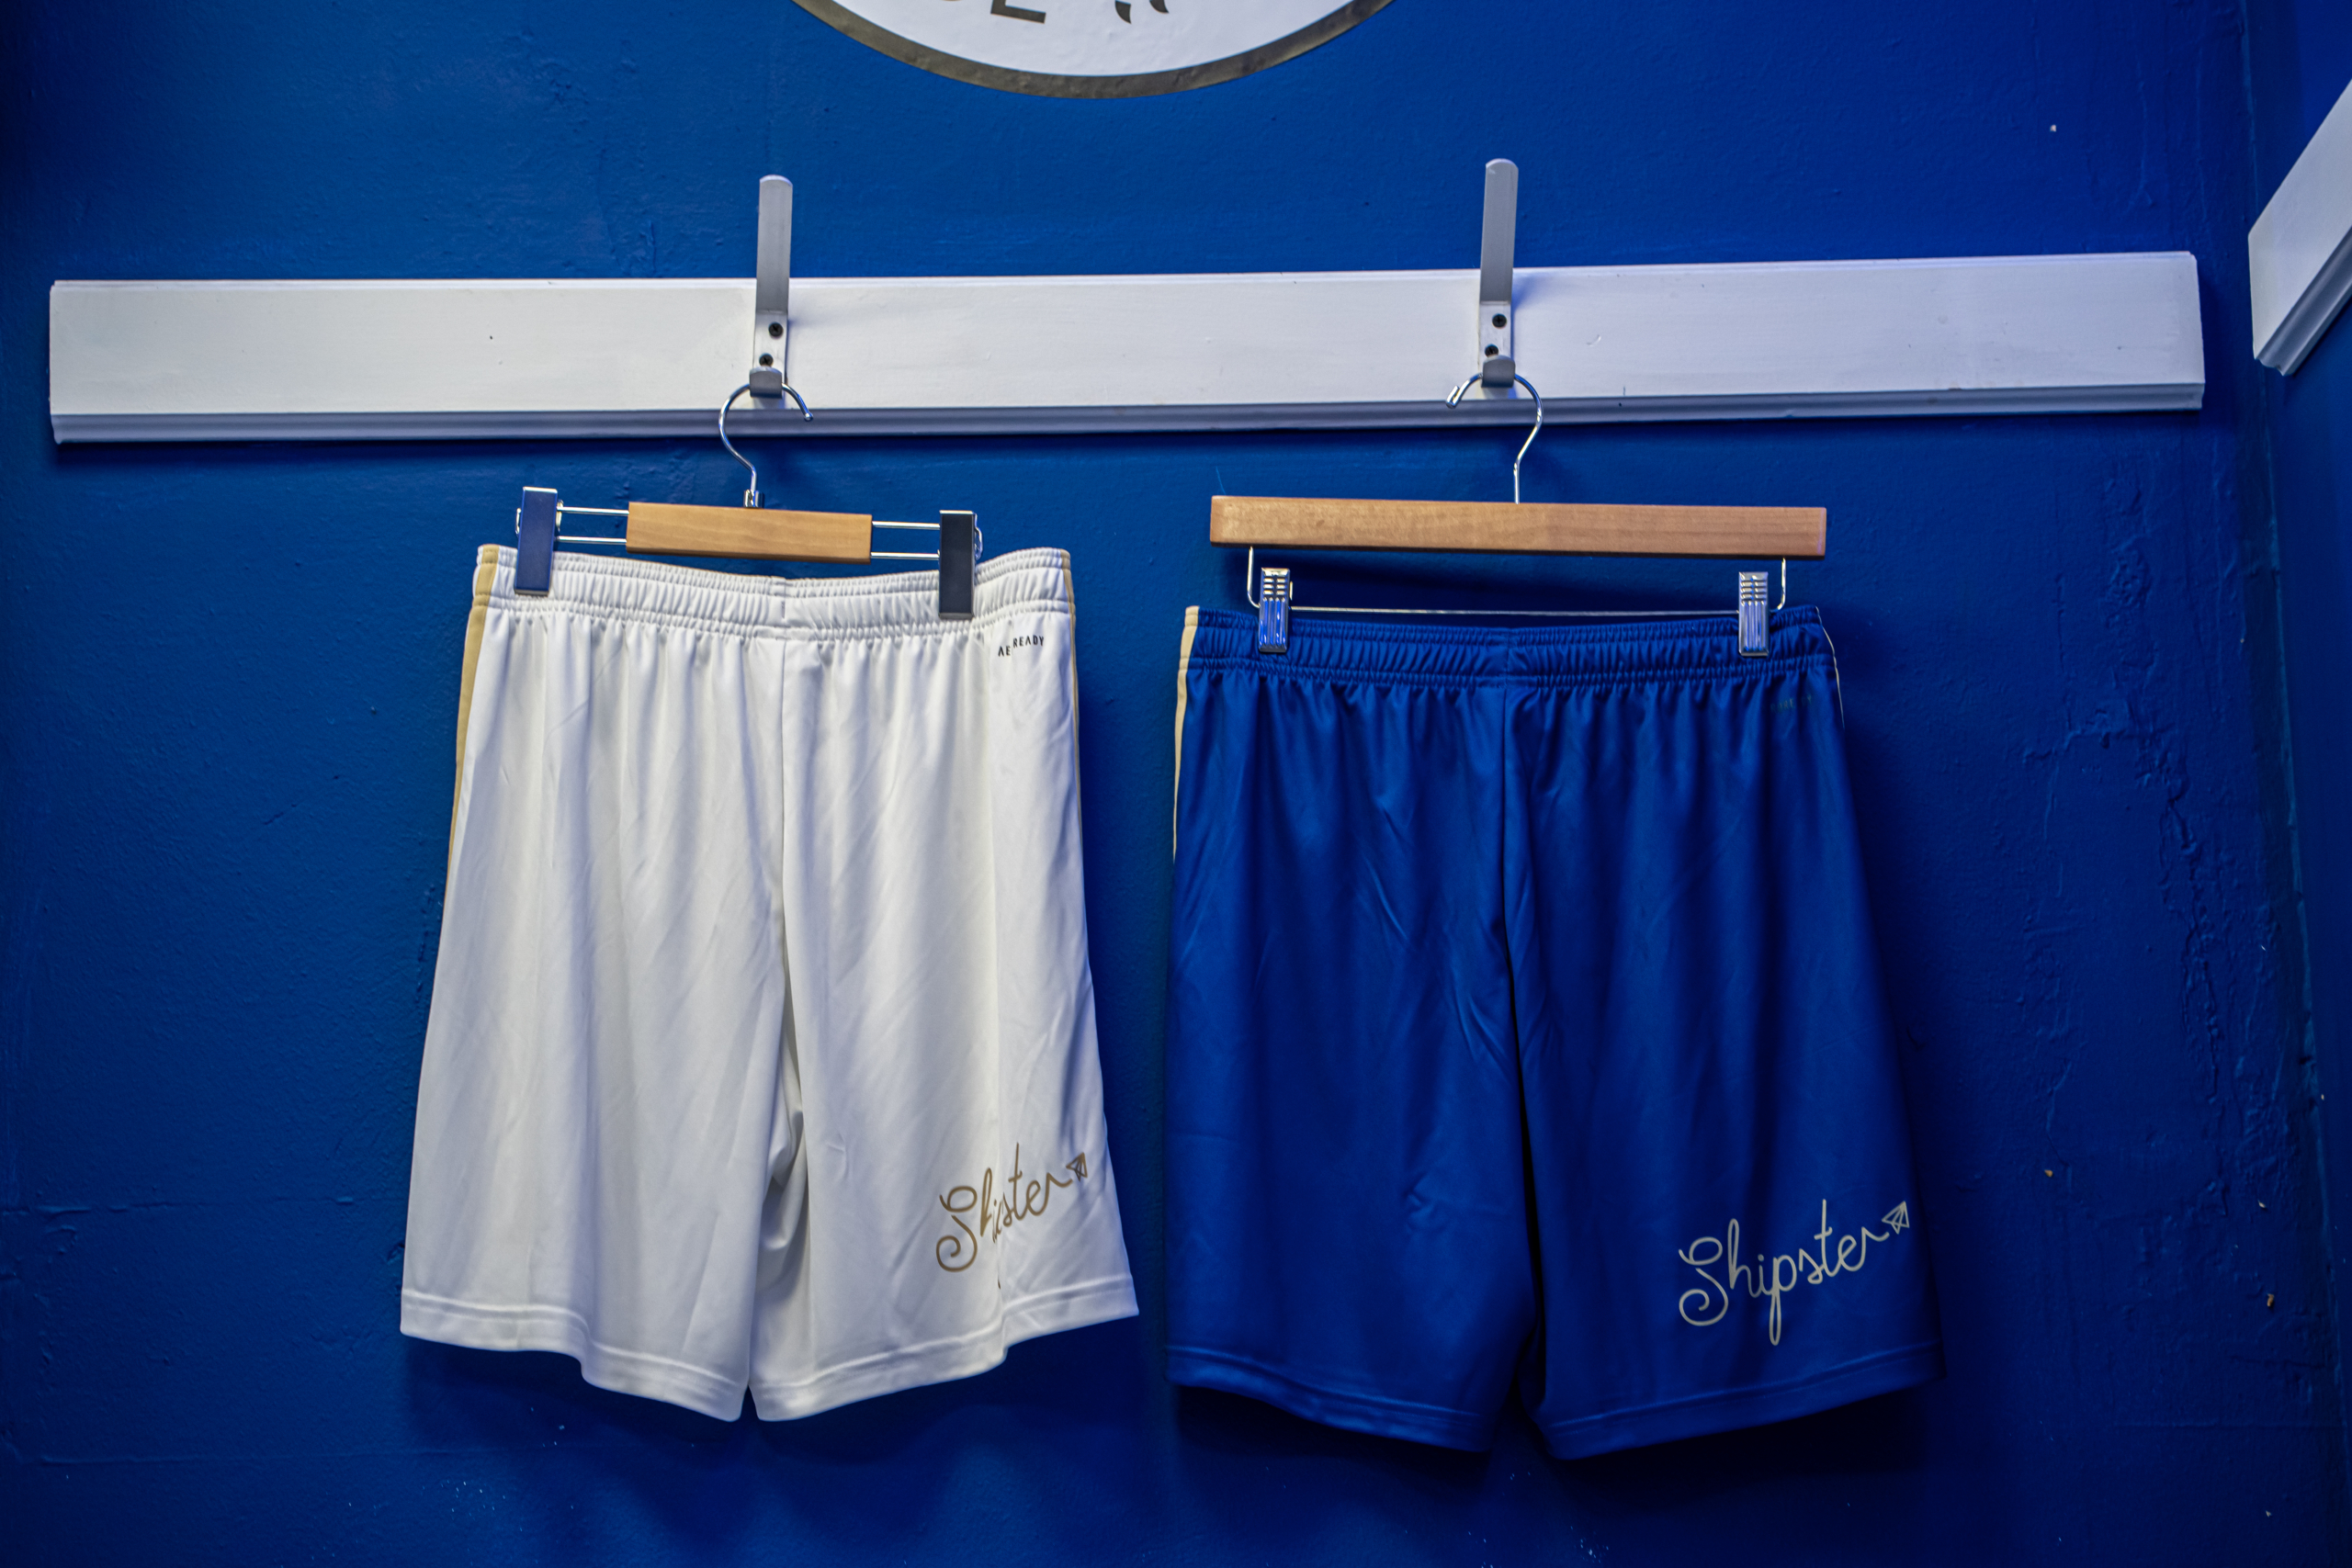 SHIPSTER SPONSORS MACCLESFIELD FC SHORTS FOR ANOTHER SEASON